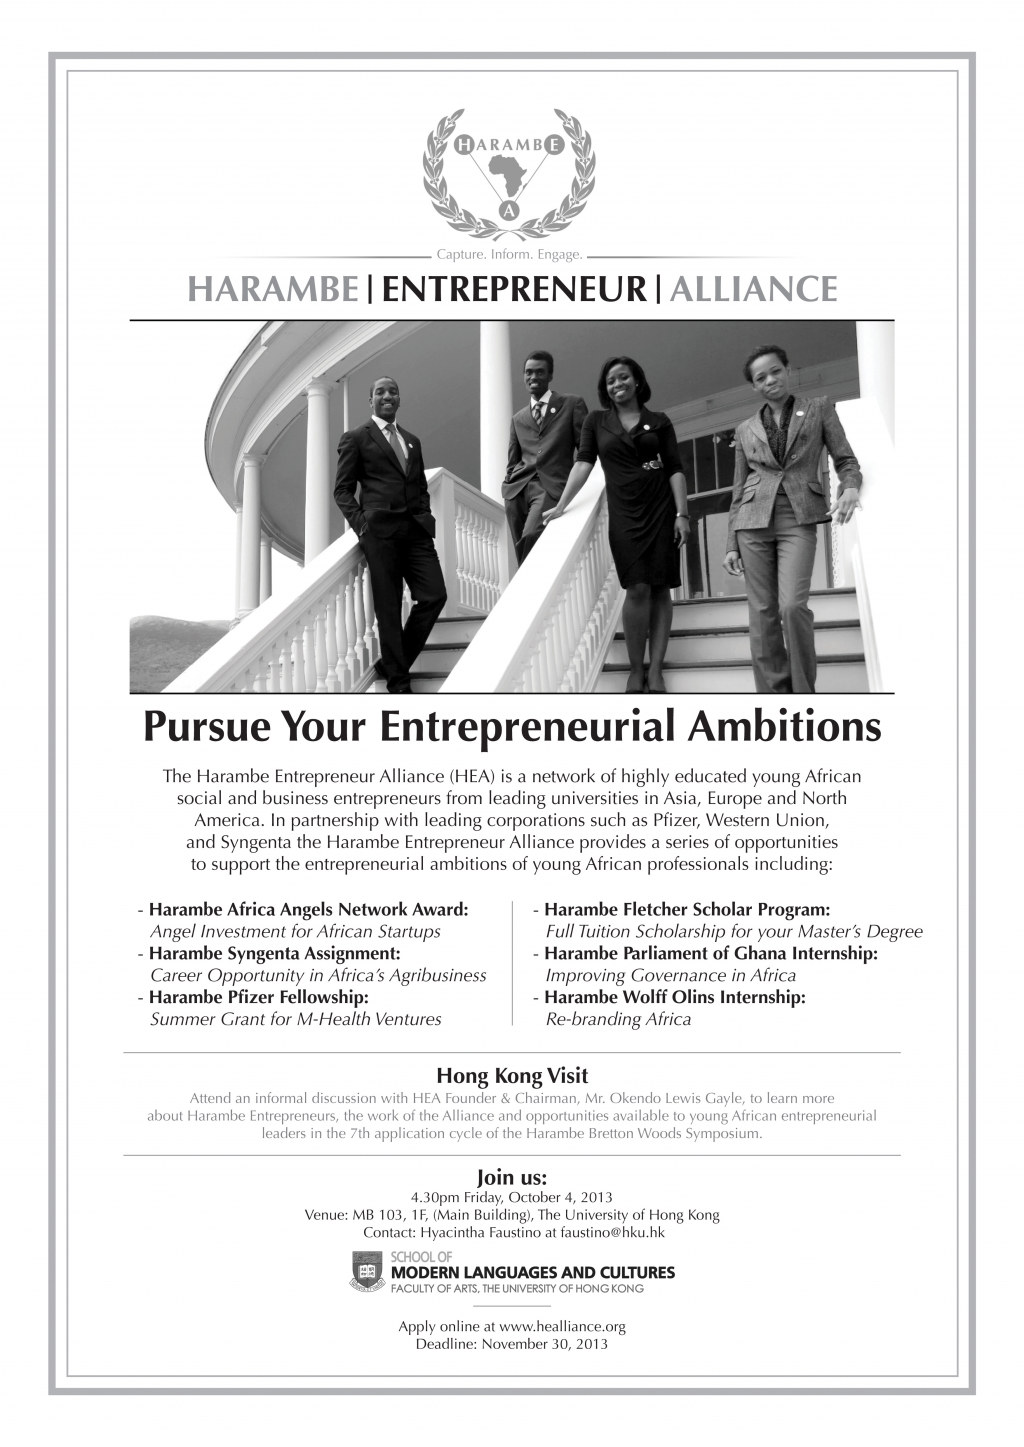 Pursue Your Entrepreneurial Ambitions: Hong Kong Visit of The Harambe Entrepreneur Alliance 